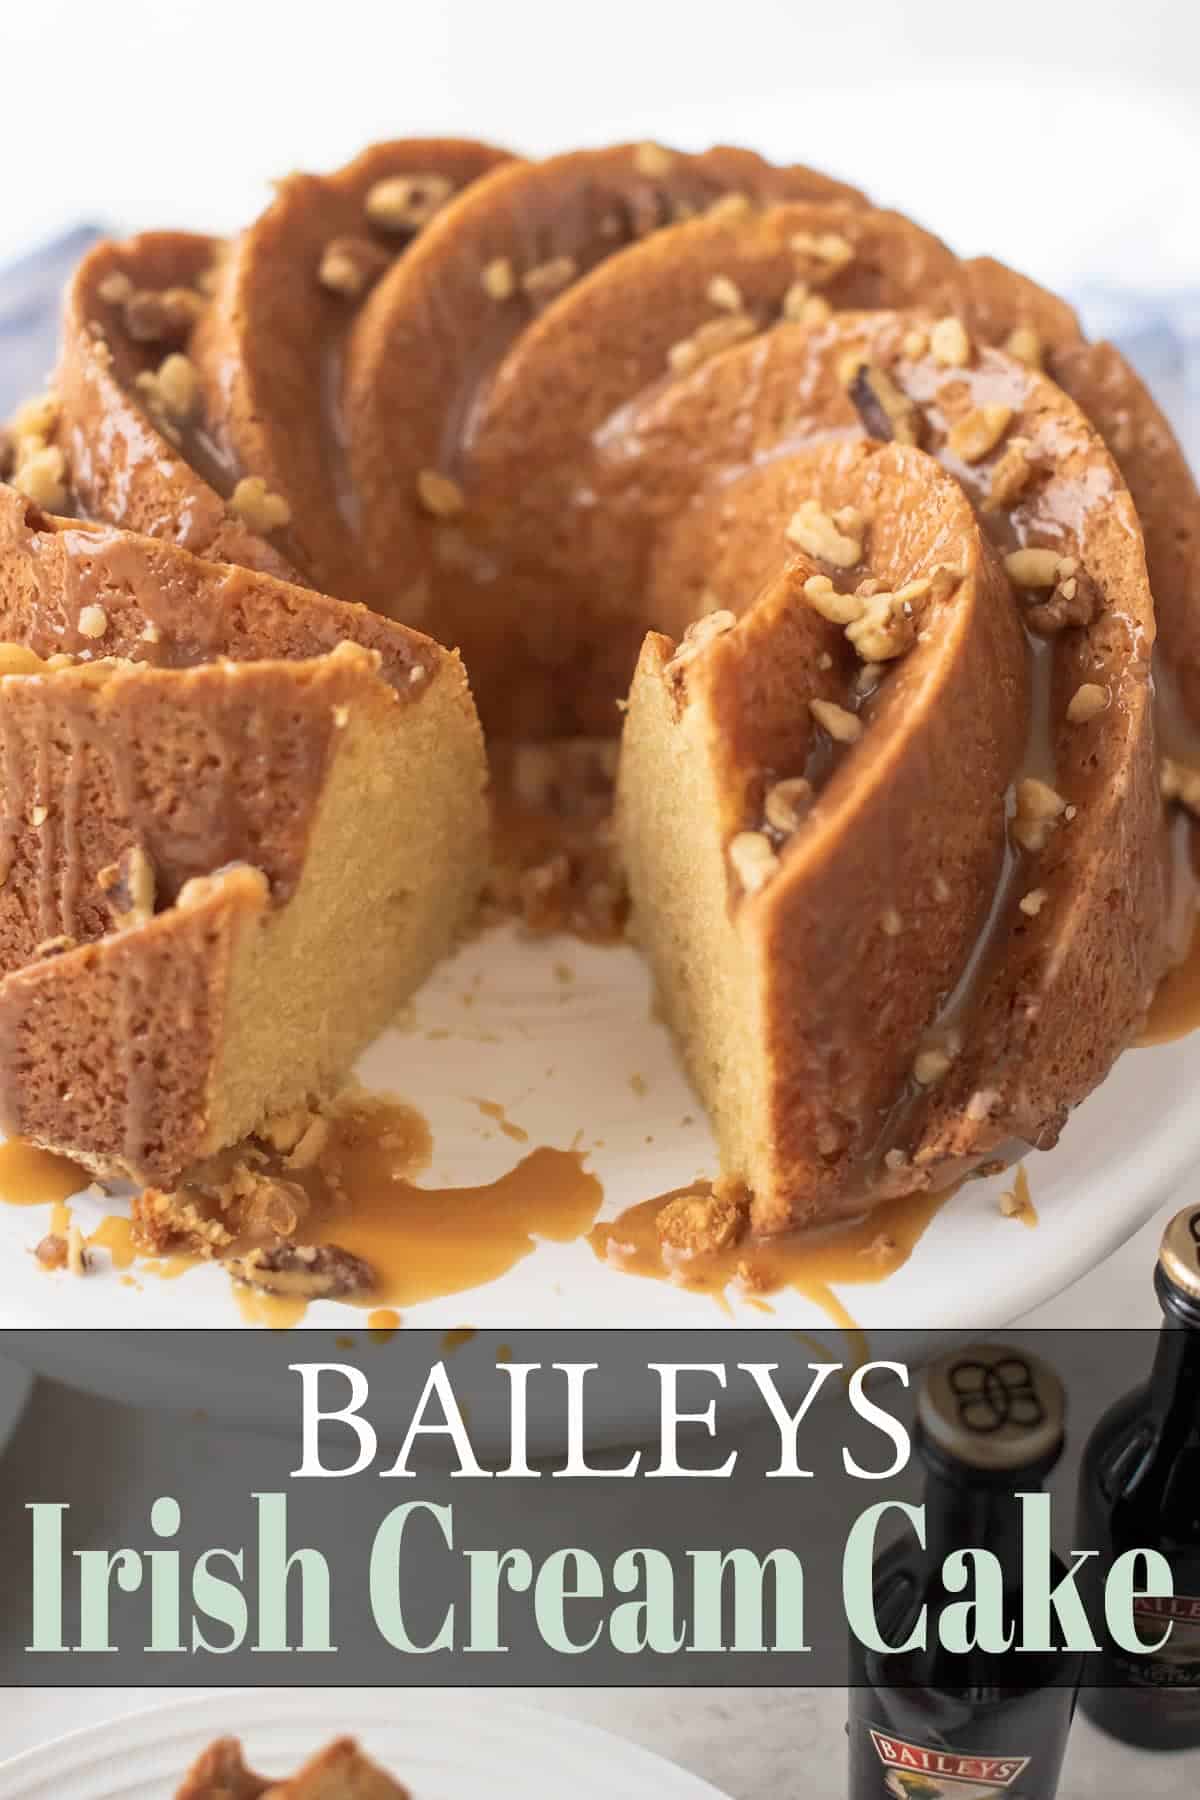 Baileys irish cream cake topped with chopped nuts with a slice removed.